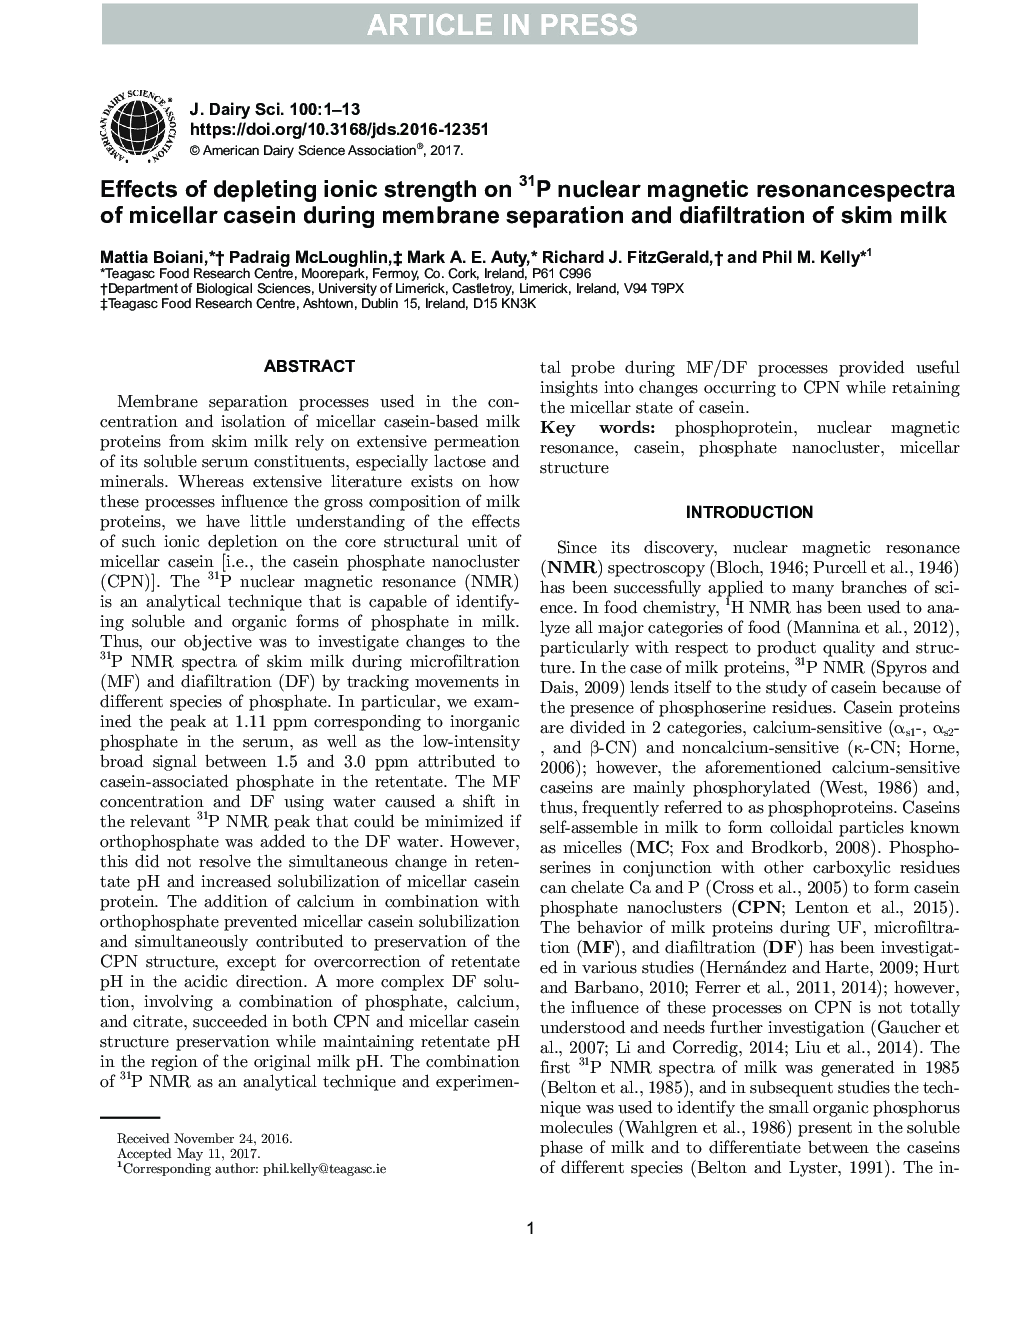 Effects of depleting ionic strength on 31P nuclear magnetic resonance spectra of micellar casein during membrane separation and diafiltration of skim milk